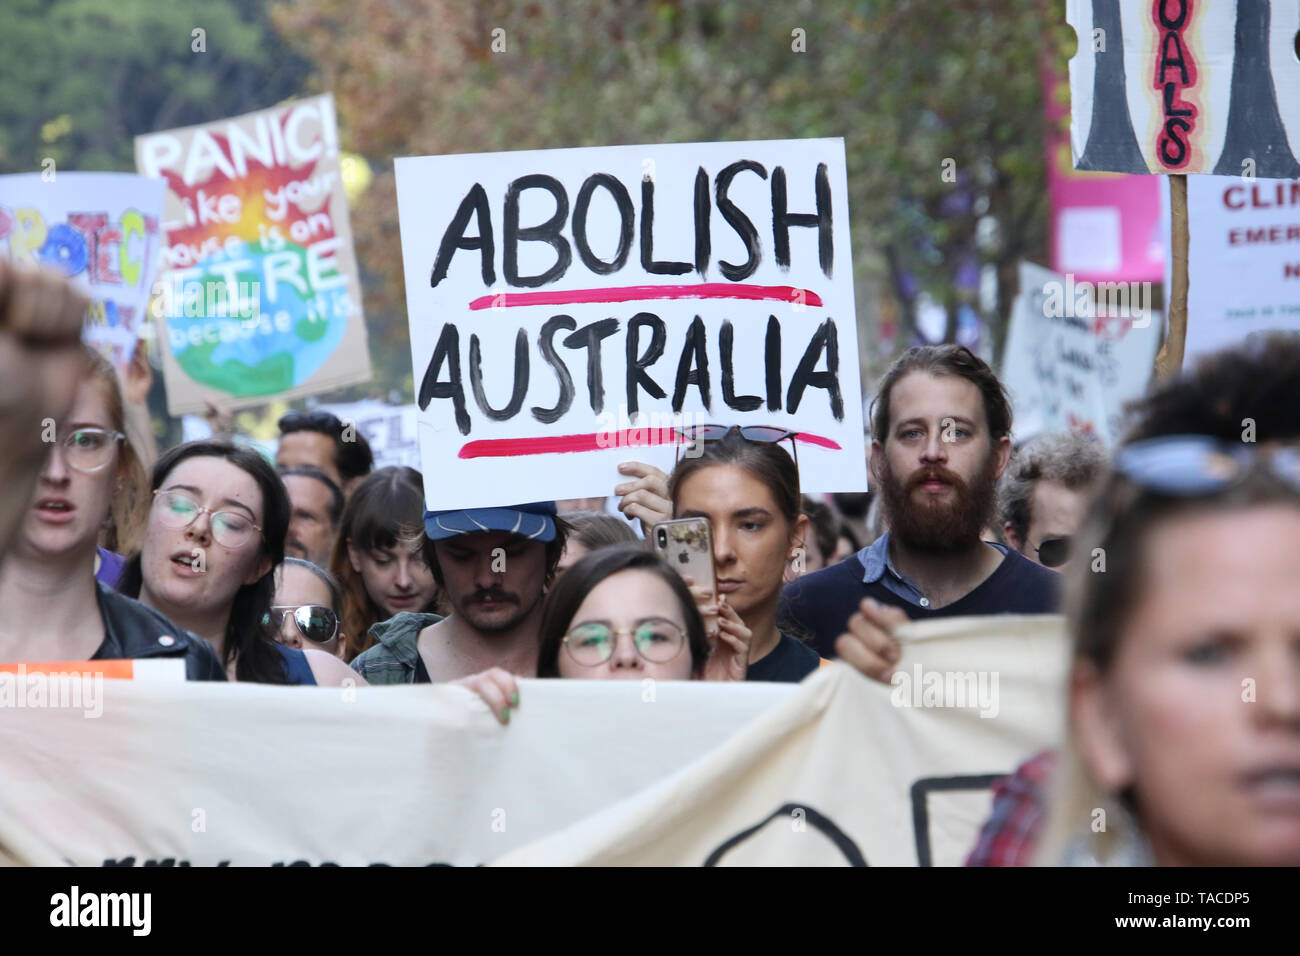 Sydney, Australia. 24th May 2019. Led by Grandmothers Against Removals (GMAR), activists held a protest to stop the widescale removal of Aboriginal children from their families. Some environment protesters joined the group. Credit: Richard Milnes/Alamy Live News Stock Photo